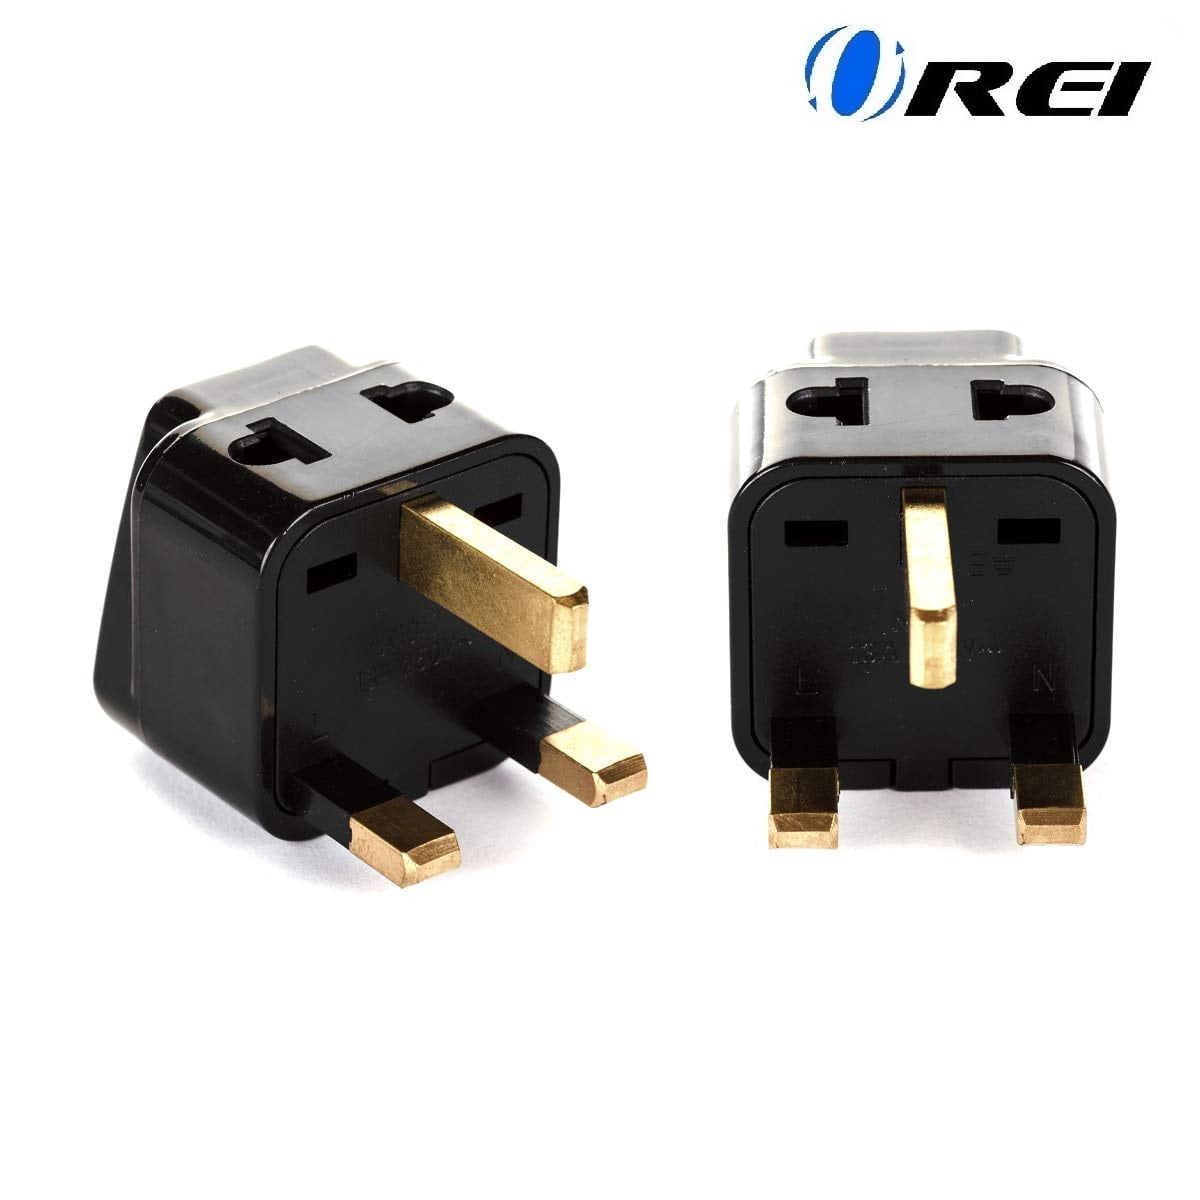 OREI American USA To European Schuko Germany Plug Adapters CE Certified  Heavy Duty - 2 Pack (GS20)